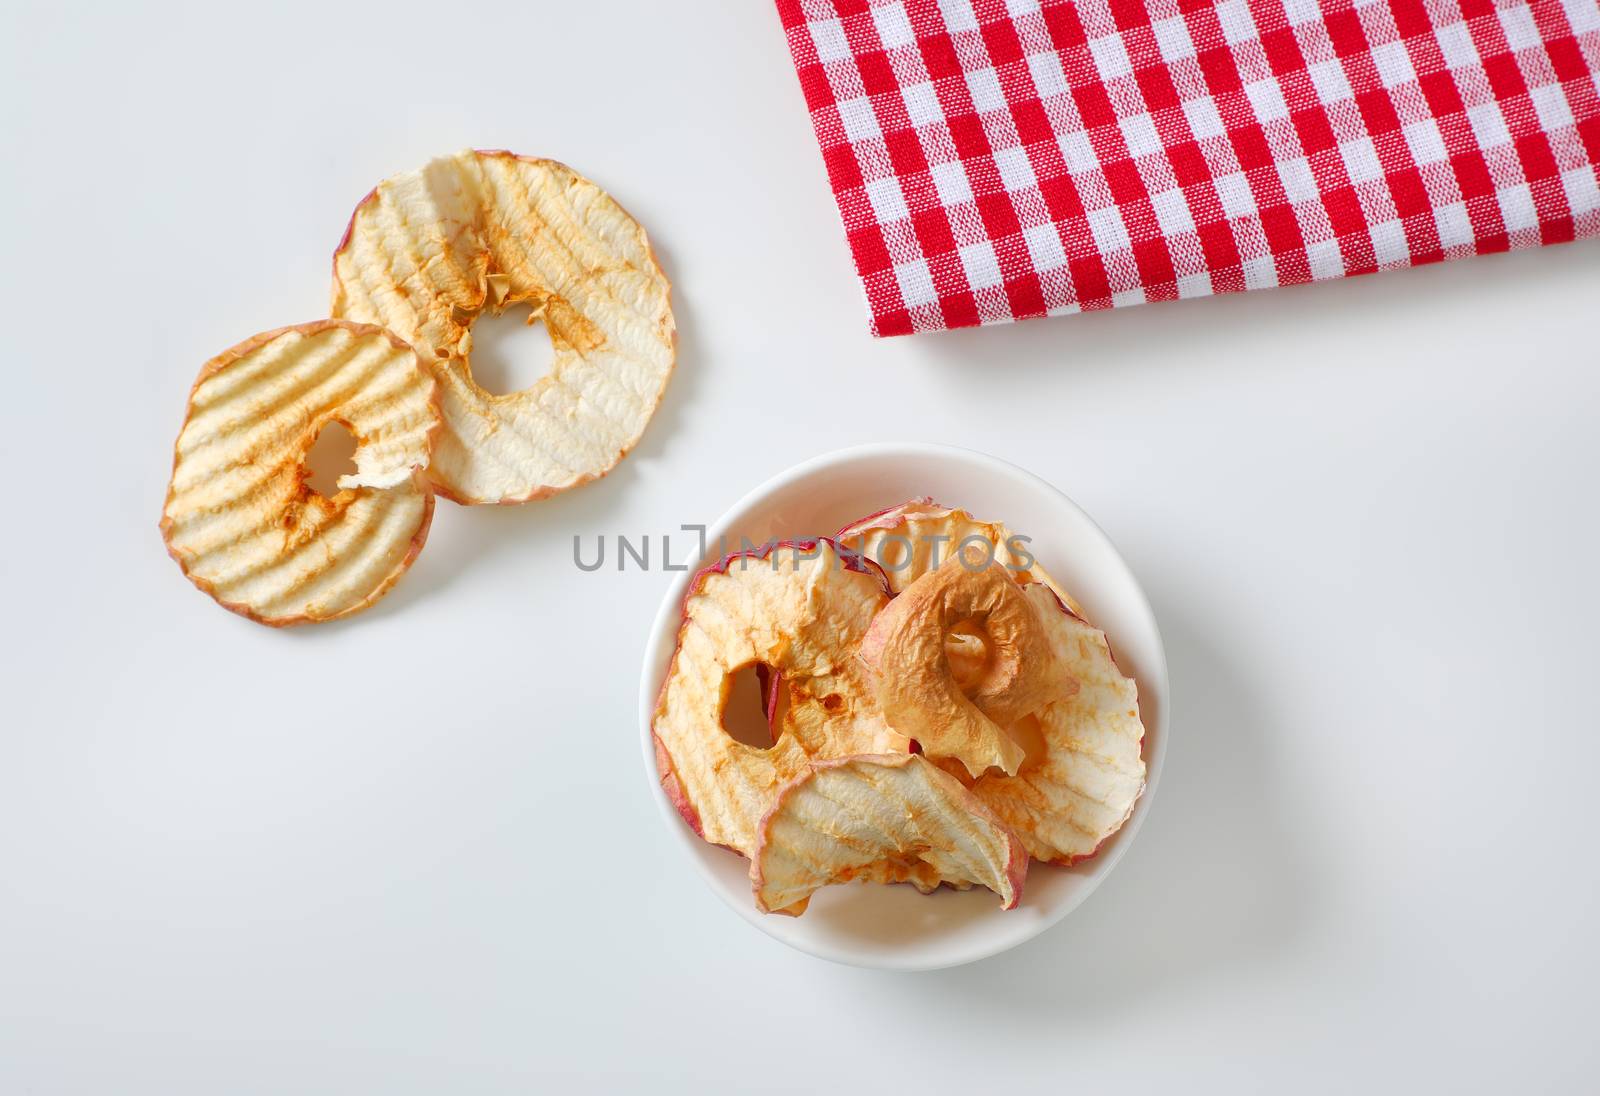 Bowl of dried apple slices - apple chips or rings